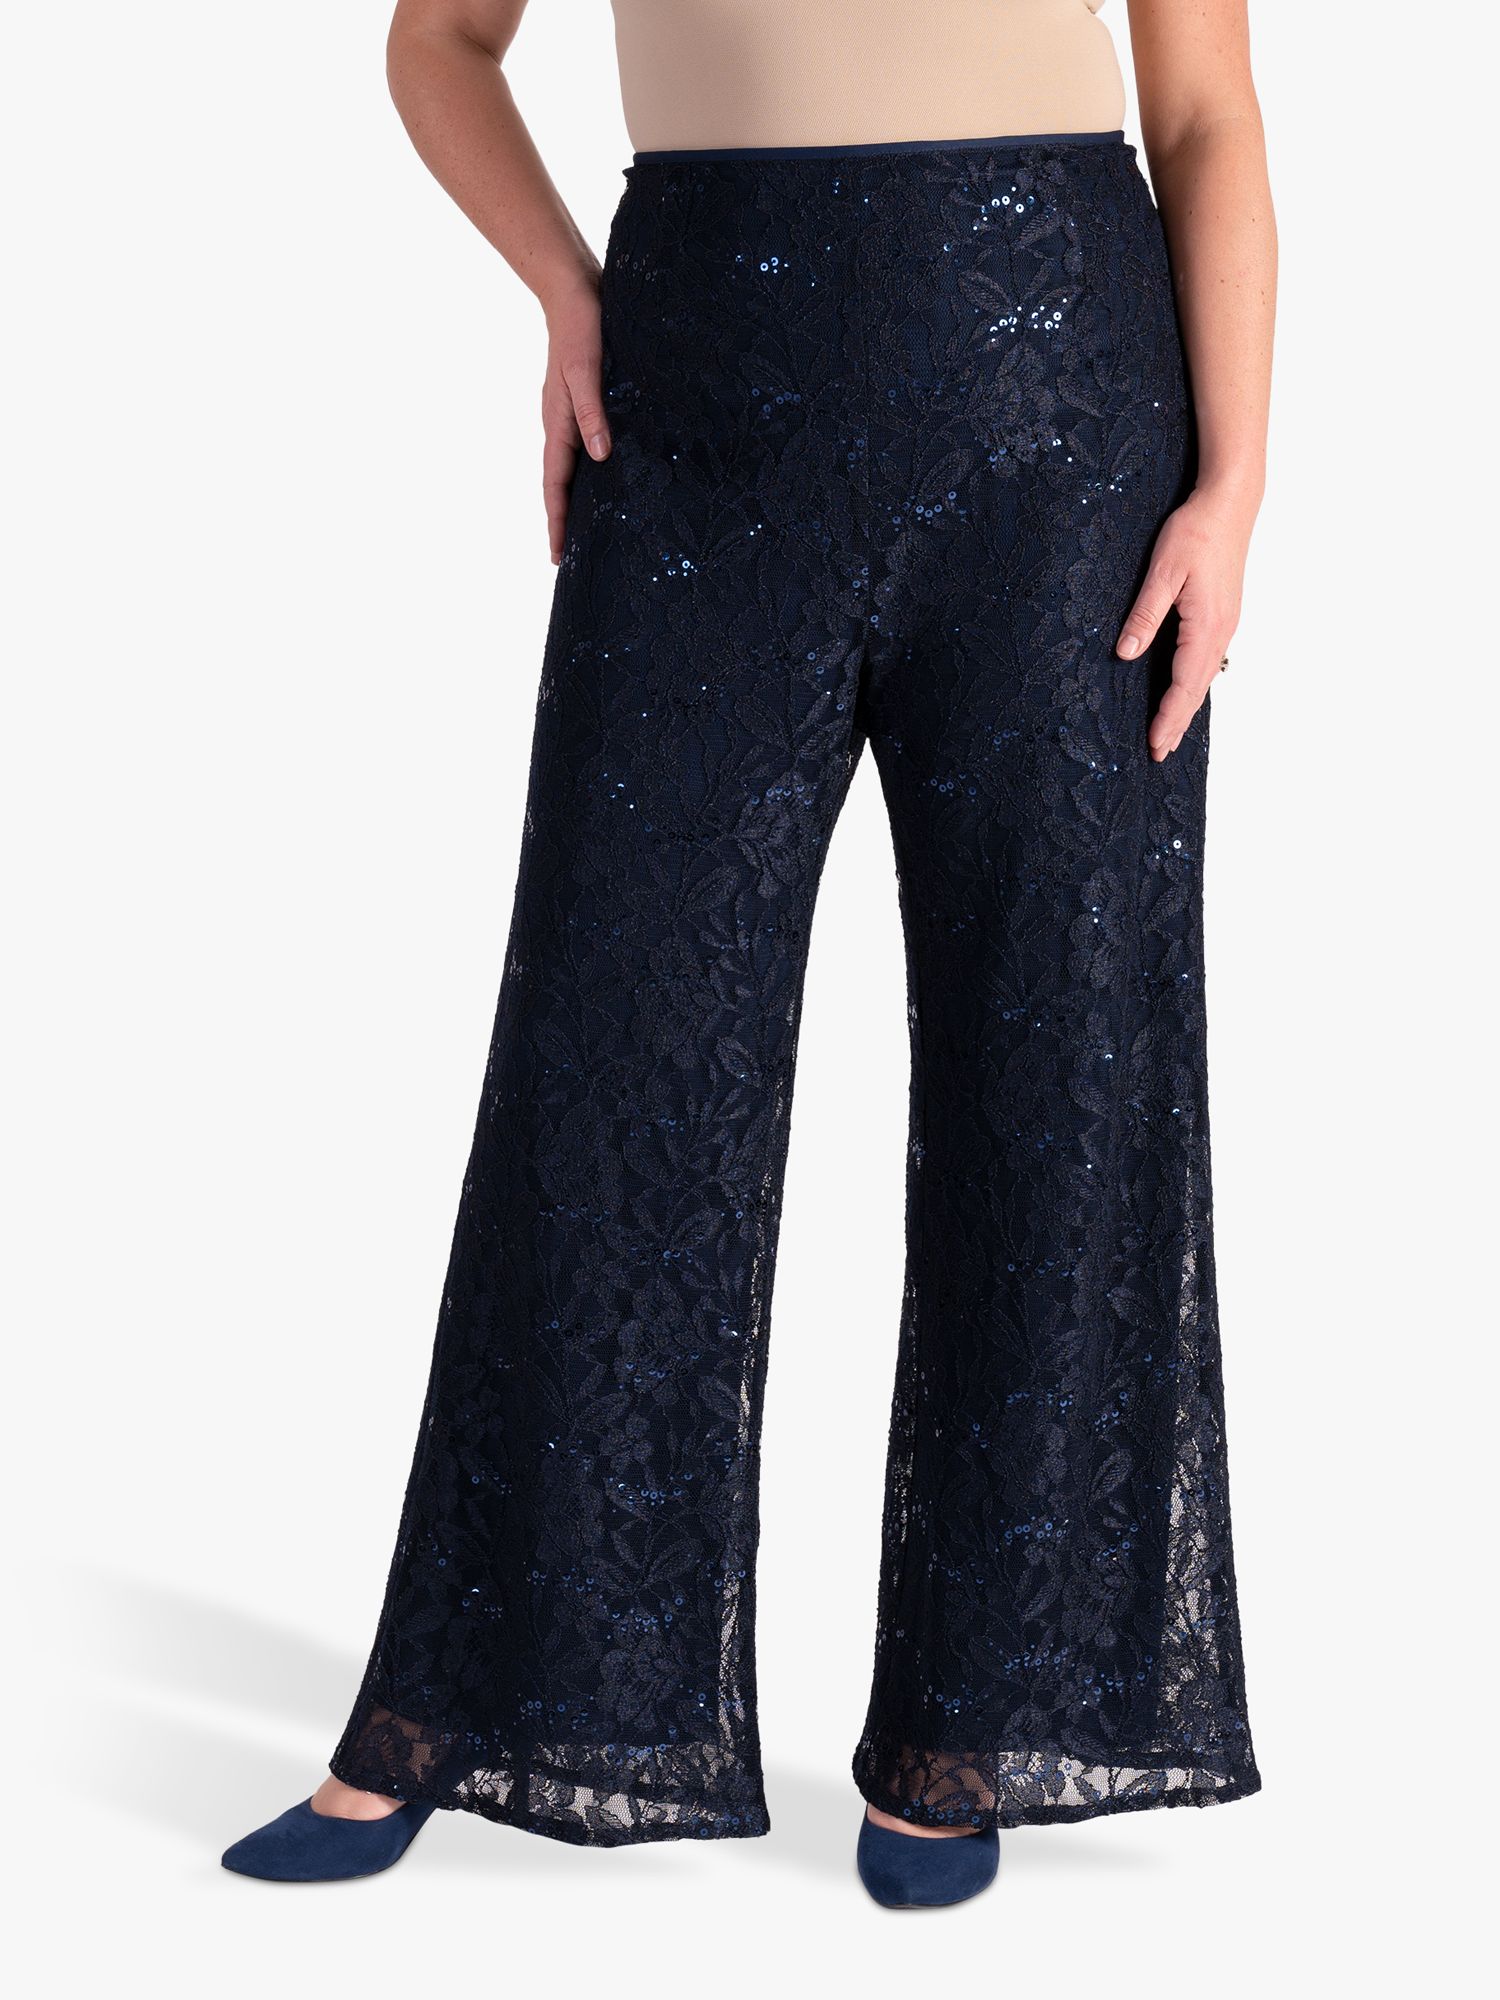 chesca Sequin Lace Wide Leg Trousers, Dark Navy, 14